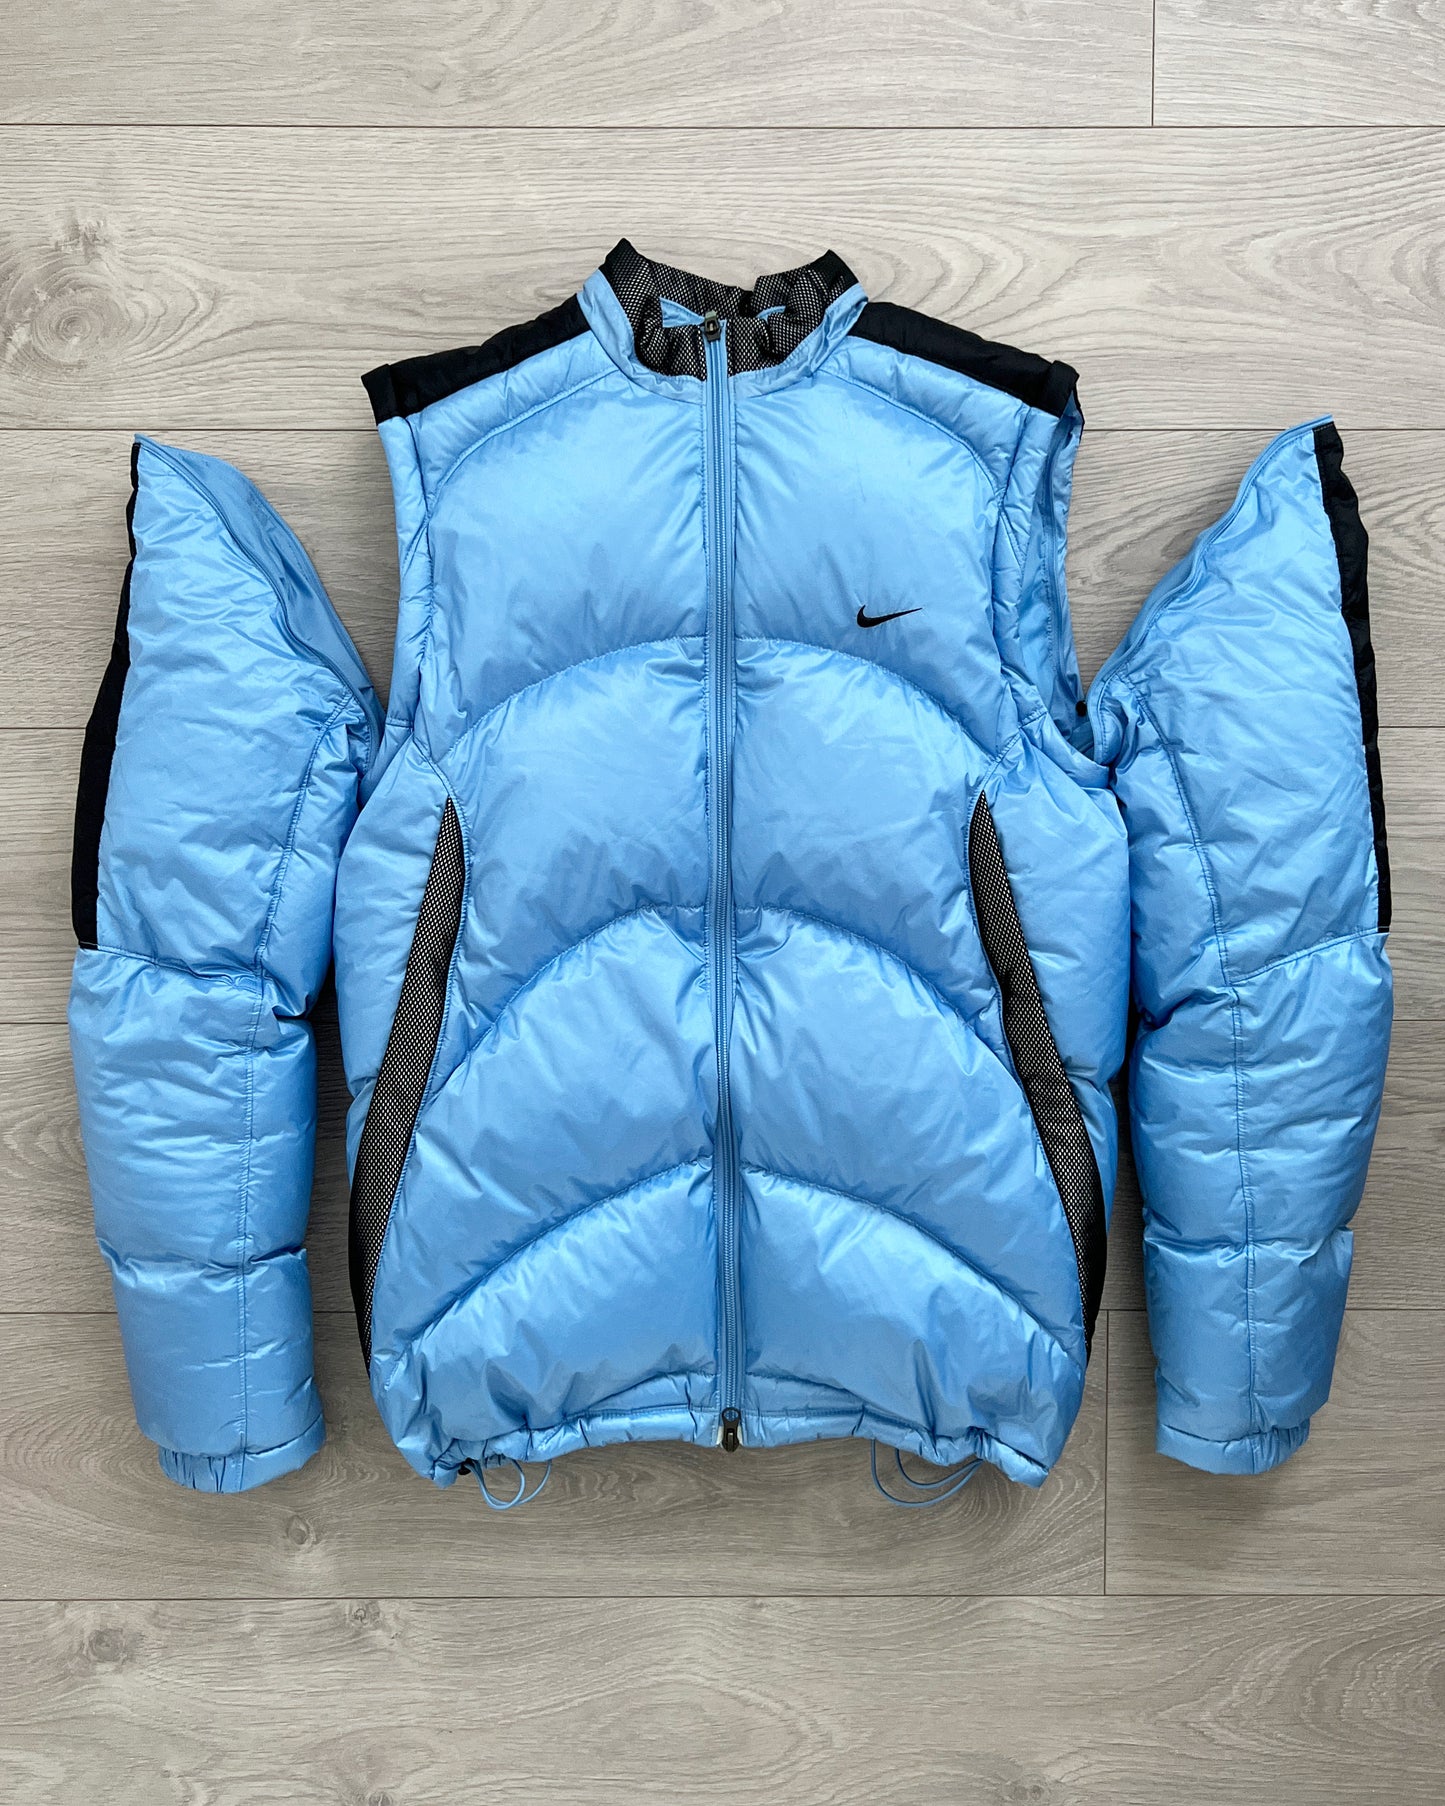 Nike FW2008 Convertible 2-in-1 Curve Stitch Puffer Jacket - Size M